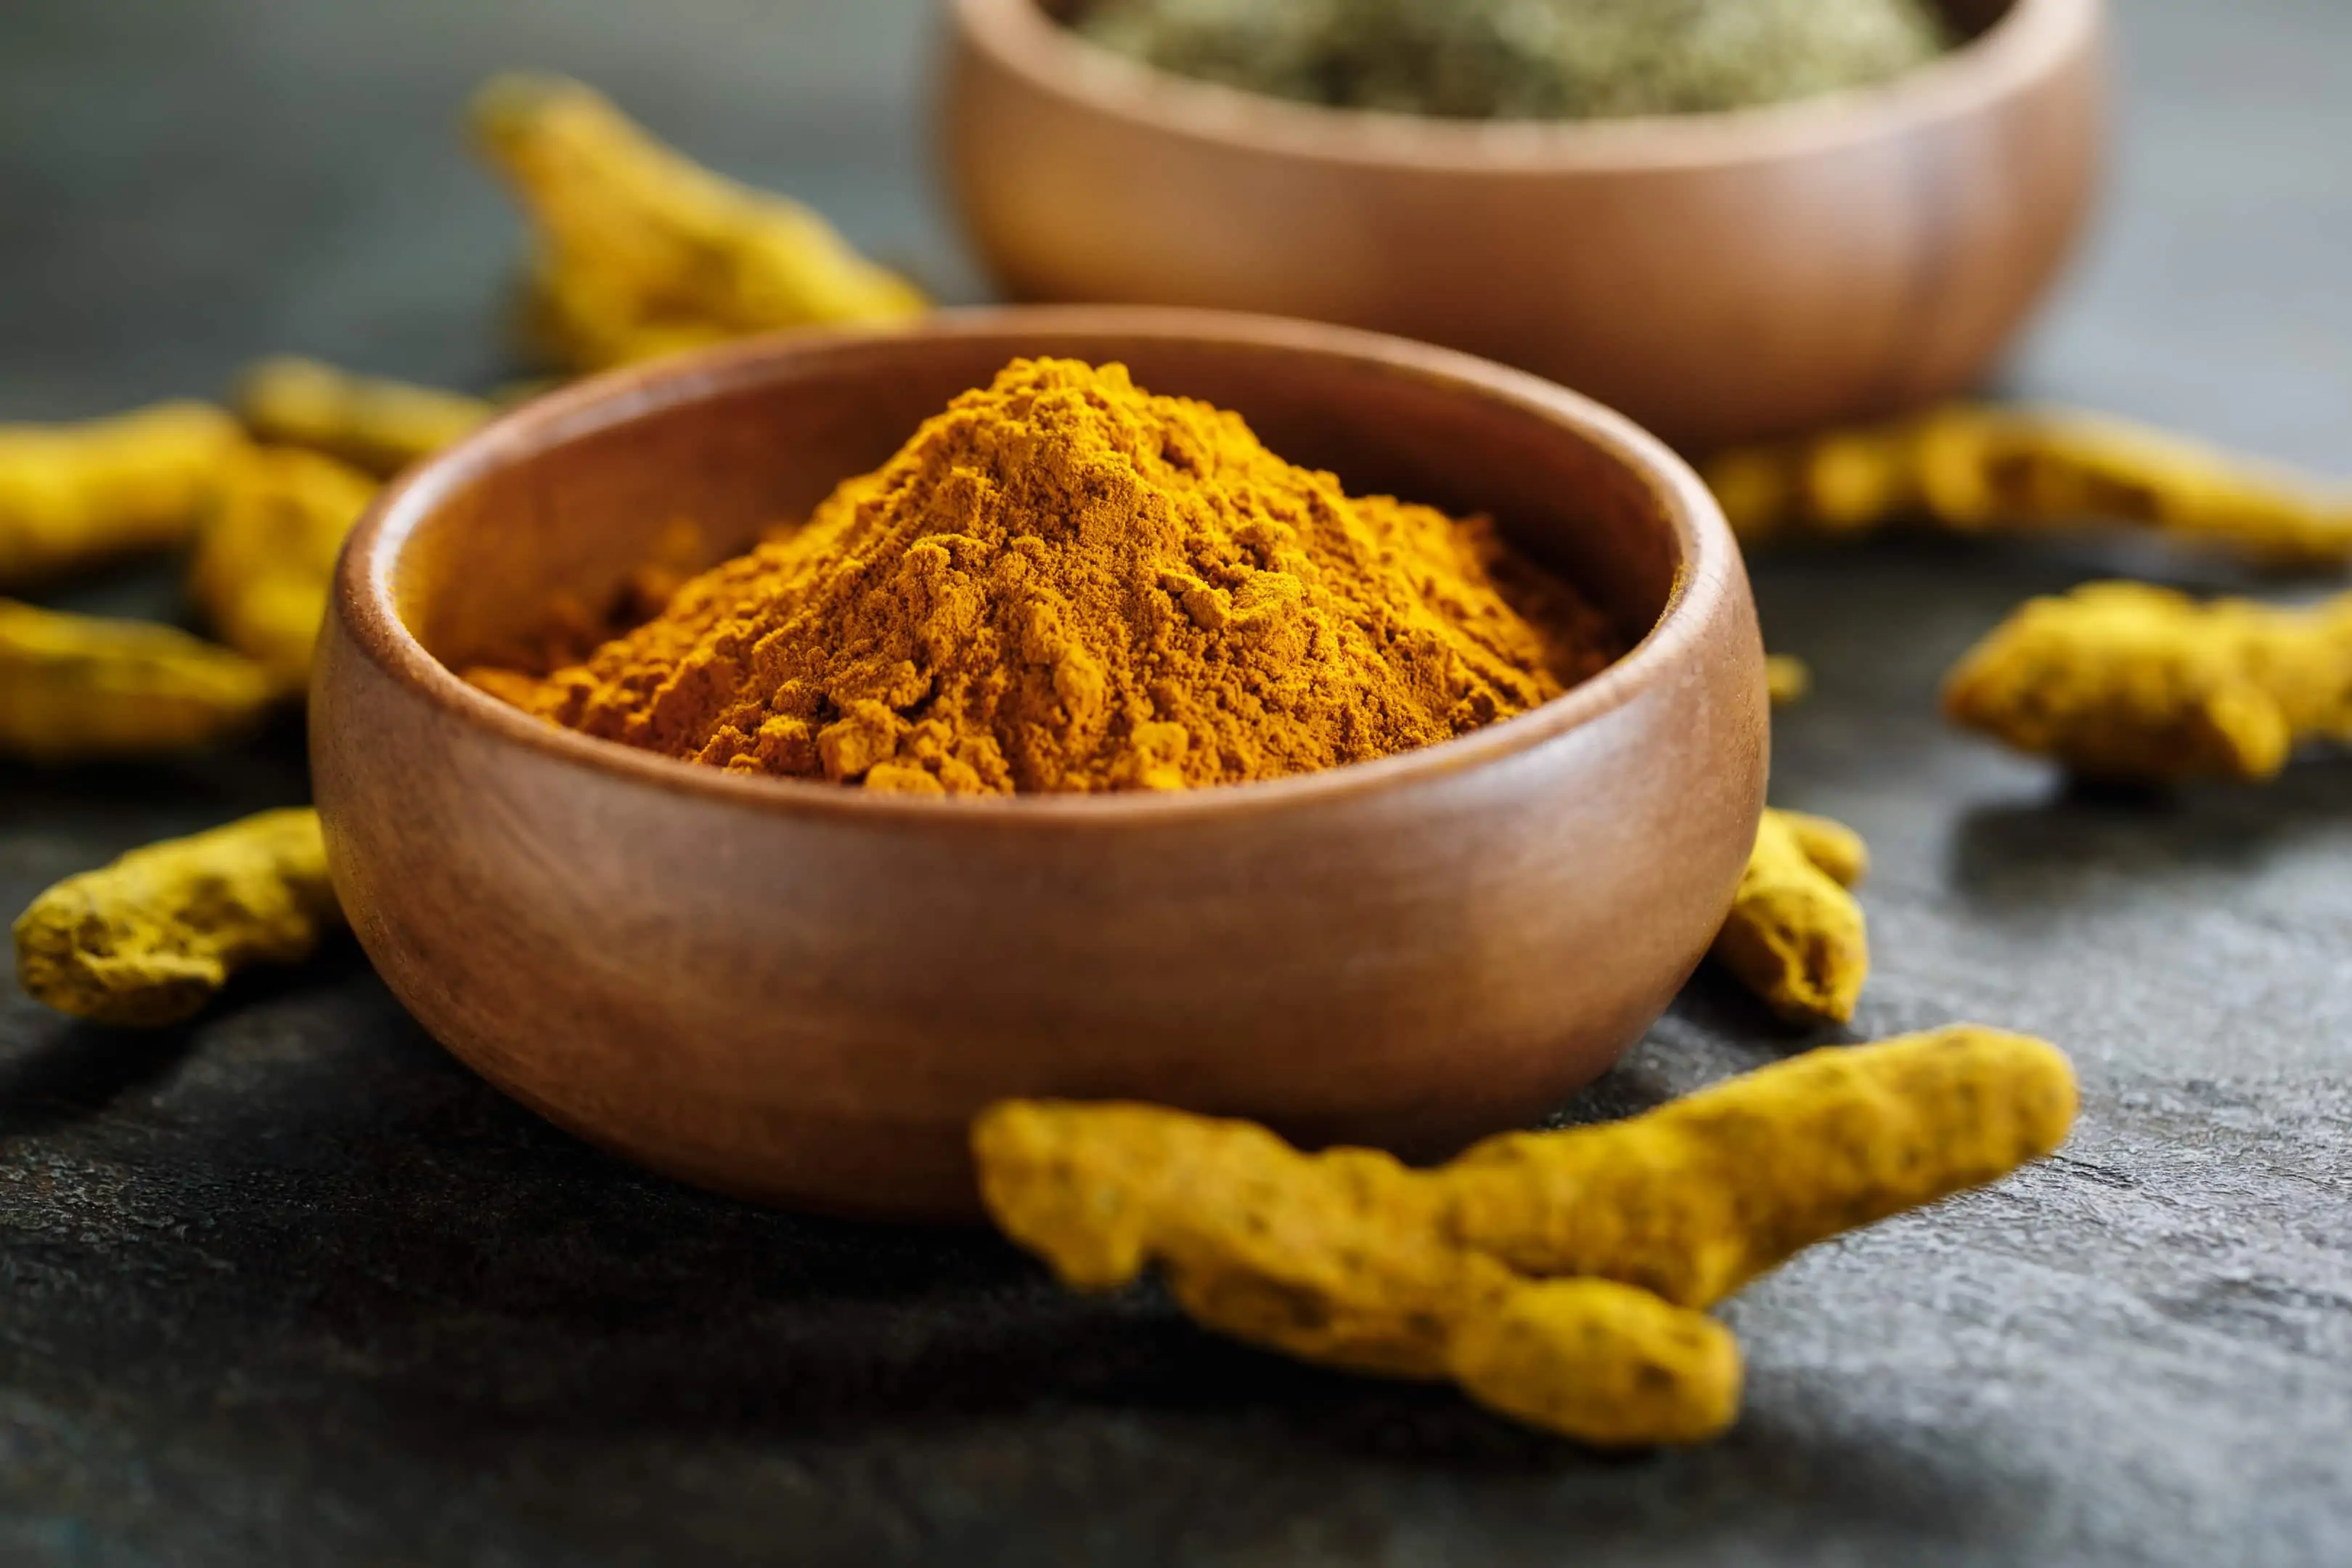 Turmeric powder. Turmeric is one of our methods on how to dissolve a cyst naturally.